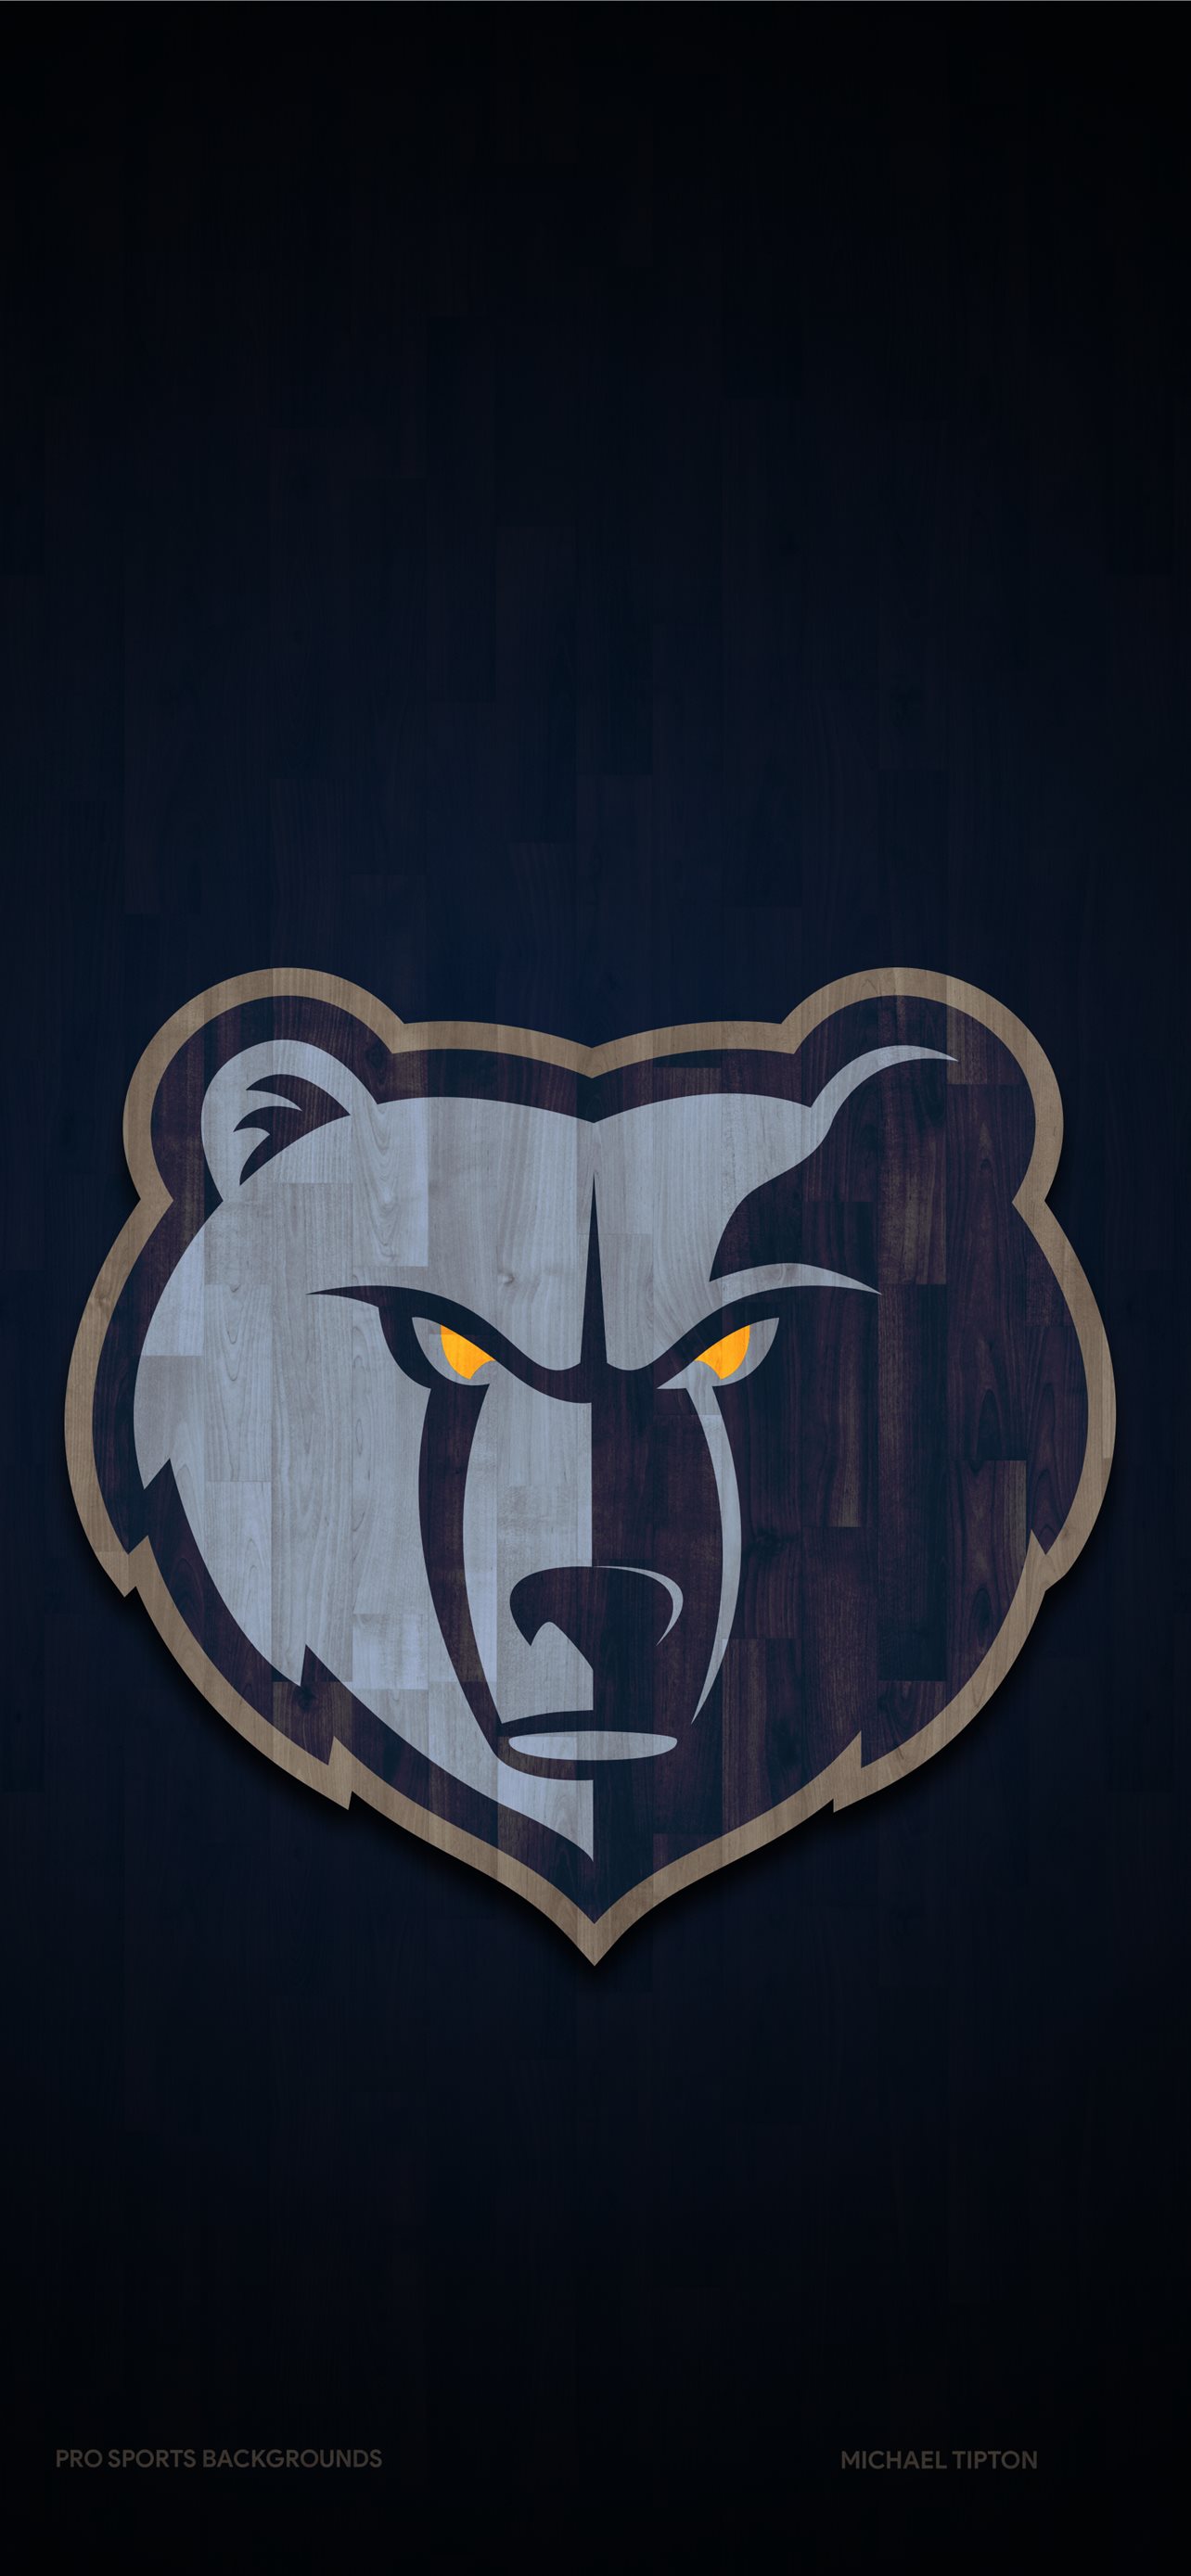 Memphis Grizzlies 1080P 2k 4k HD wallpapers backgrounds free download   Rare Gallery